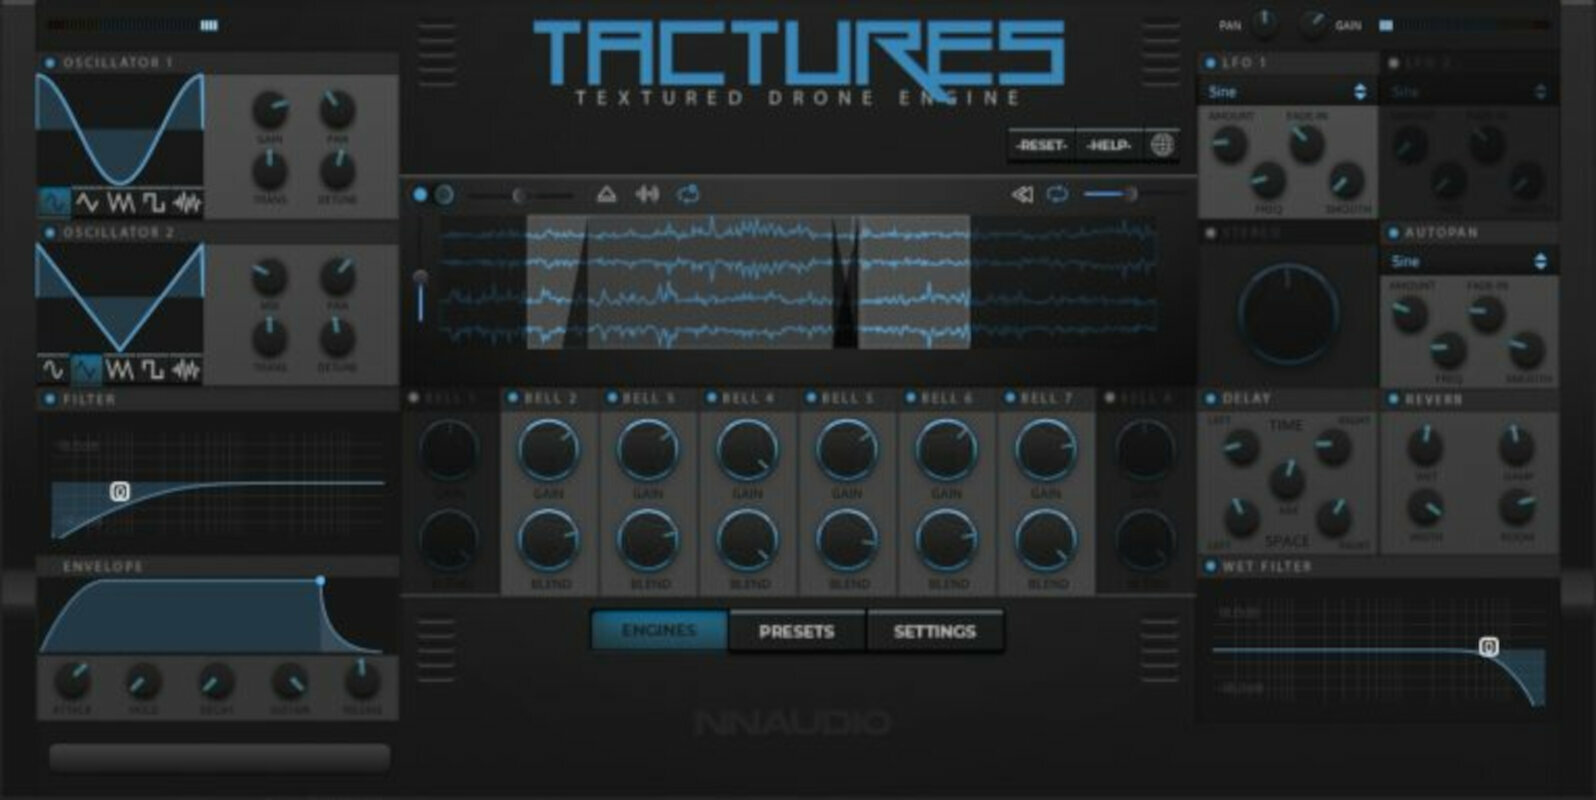 Studio software plug-in effect New Nation Tactures - Textured Drone Engine (Digitaal product)